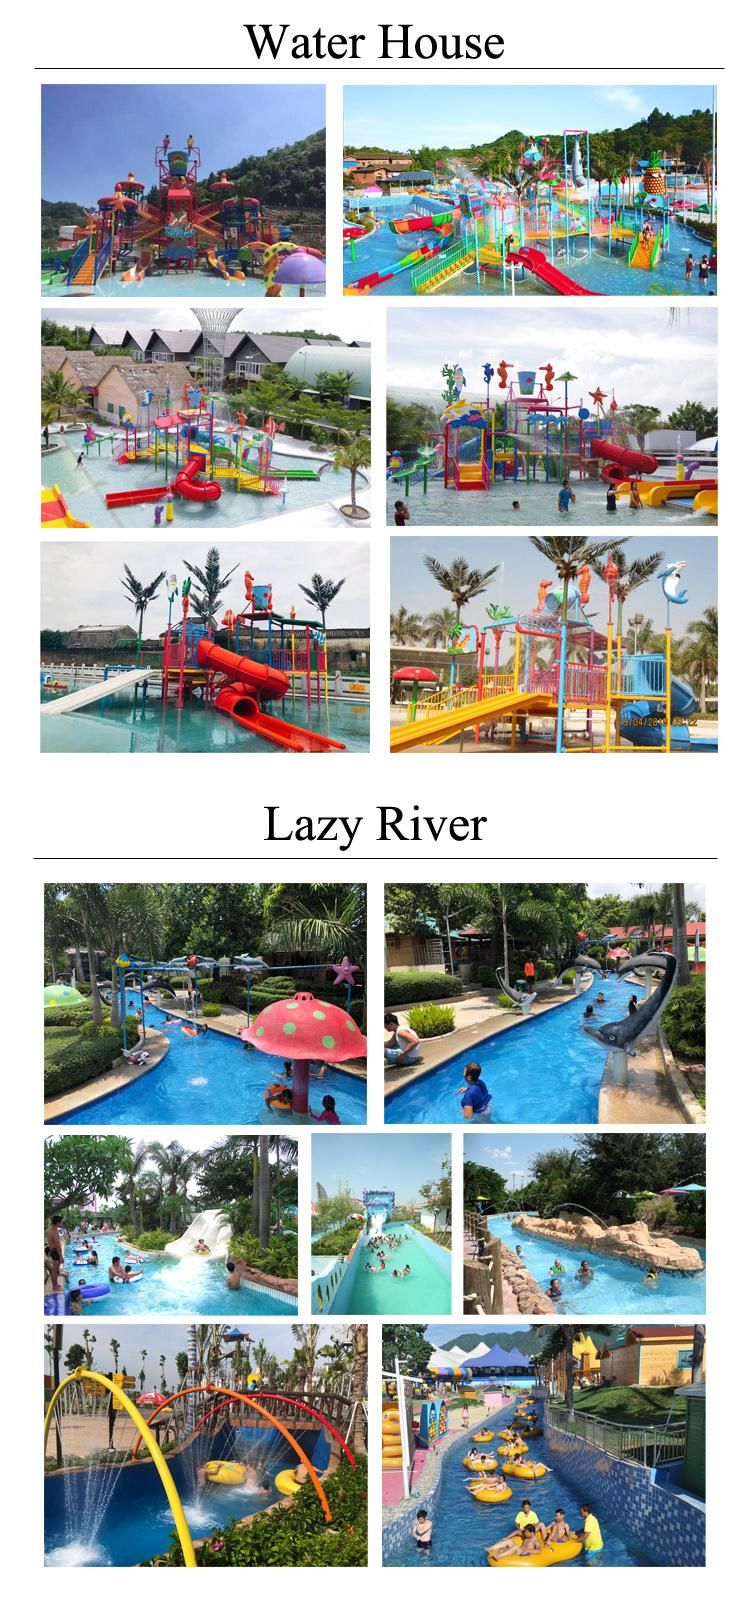 Water Play Equipment Amusement Park Slide for Adult